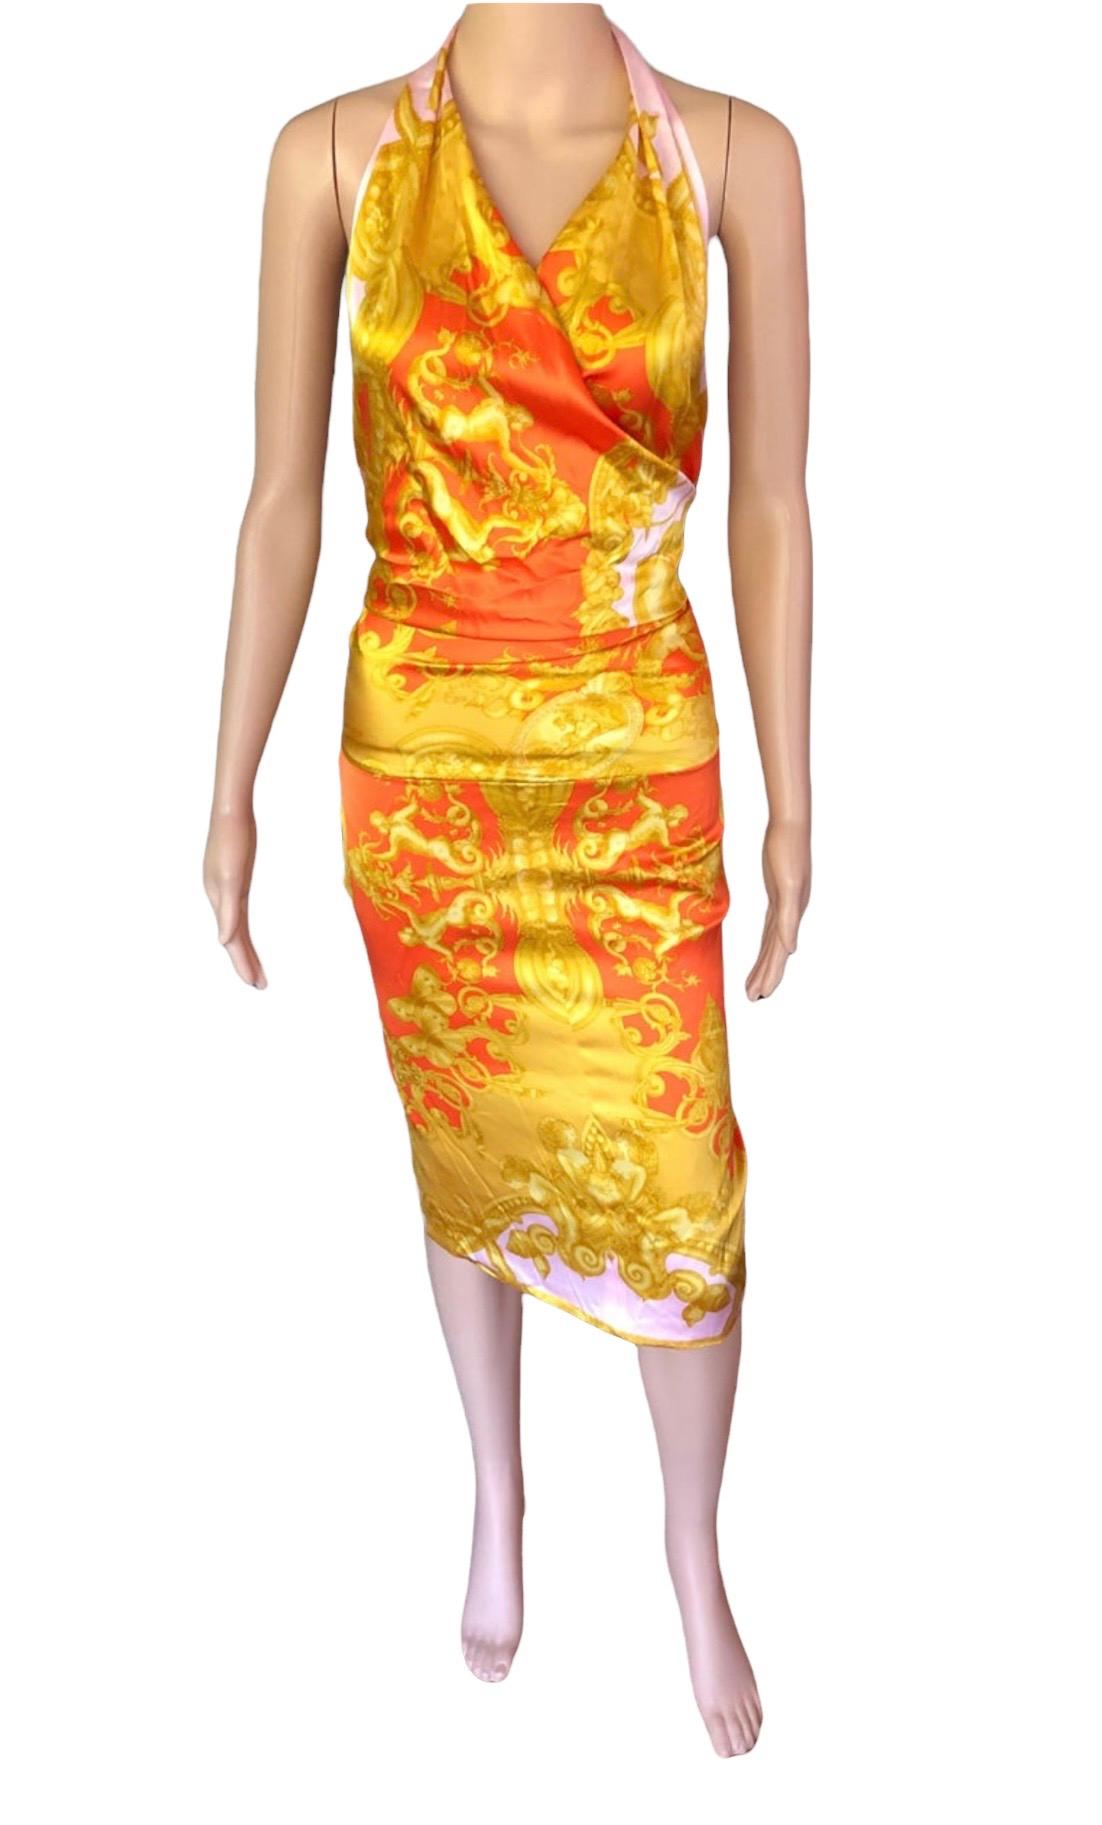 Versace S/S 2005 Runway Campaign Halter Open Back Dress IT 42

Look 29 from the Spring 2005 Collection. Rust, pink and gold Versace stretch midi halter dress with mermaid print featuring seashells and butterflies throughout, surplice neckline,